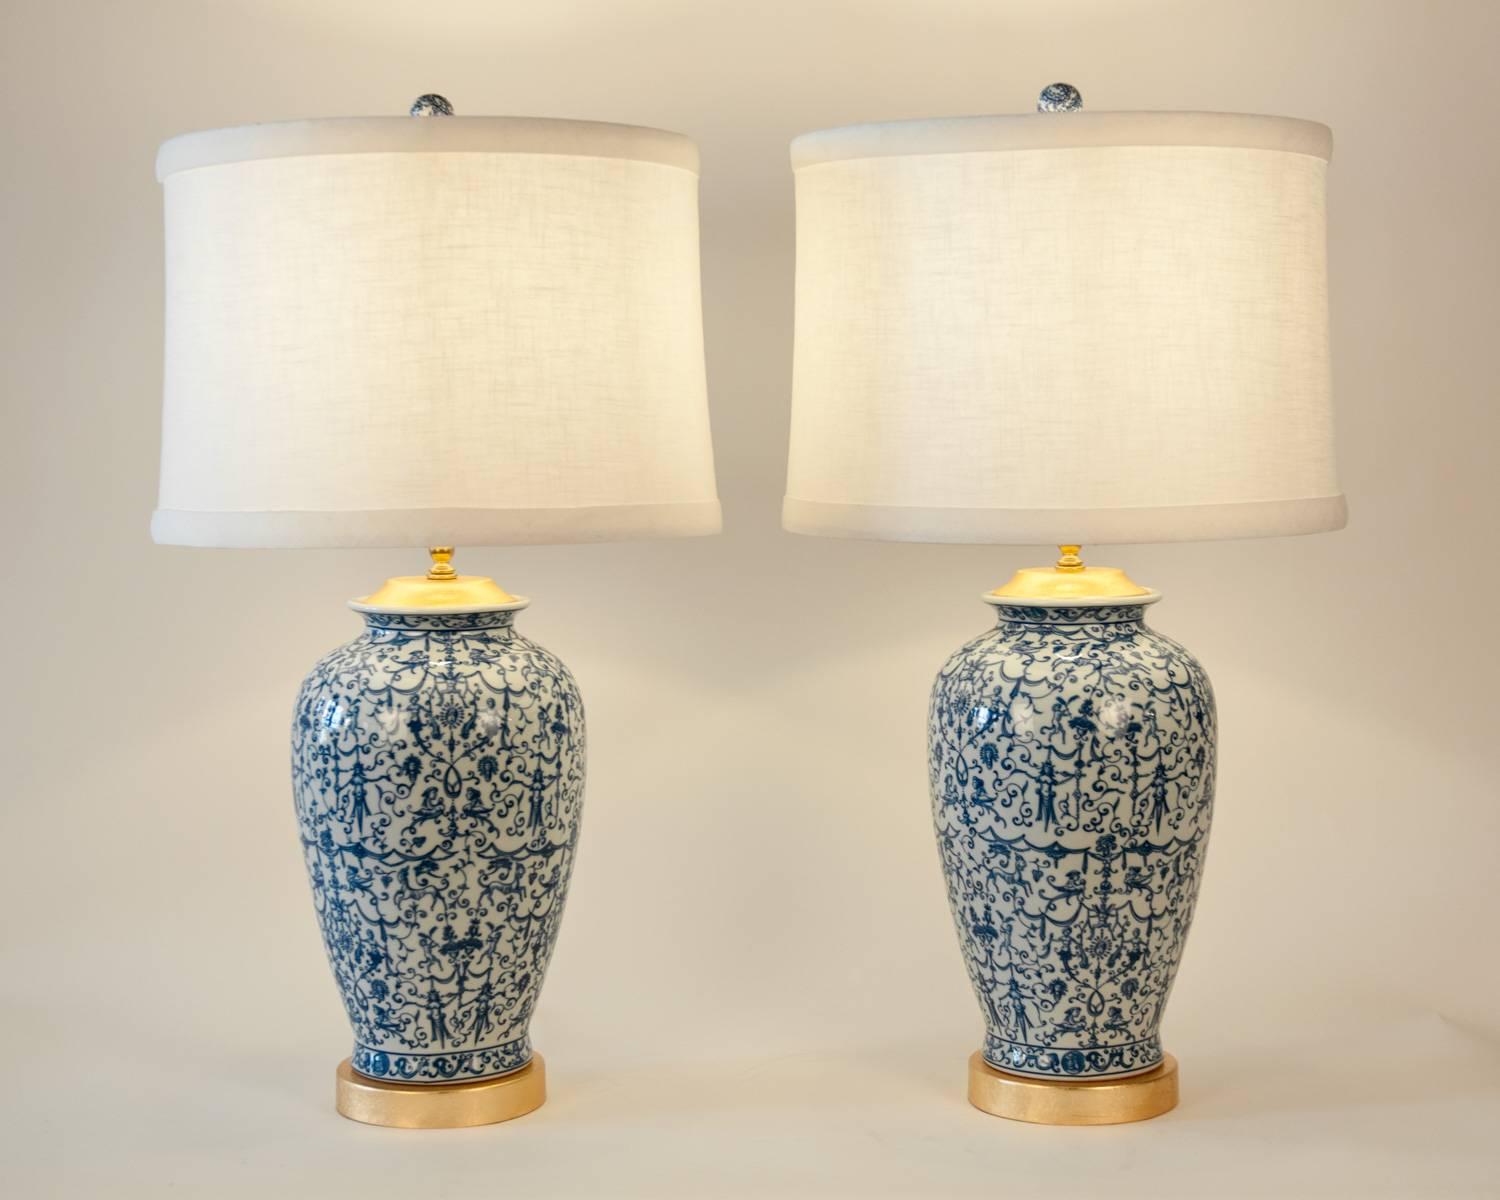 Pair of Porcelain with Wooden Base Gold-Plated Task Table Lamps 2